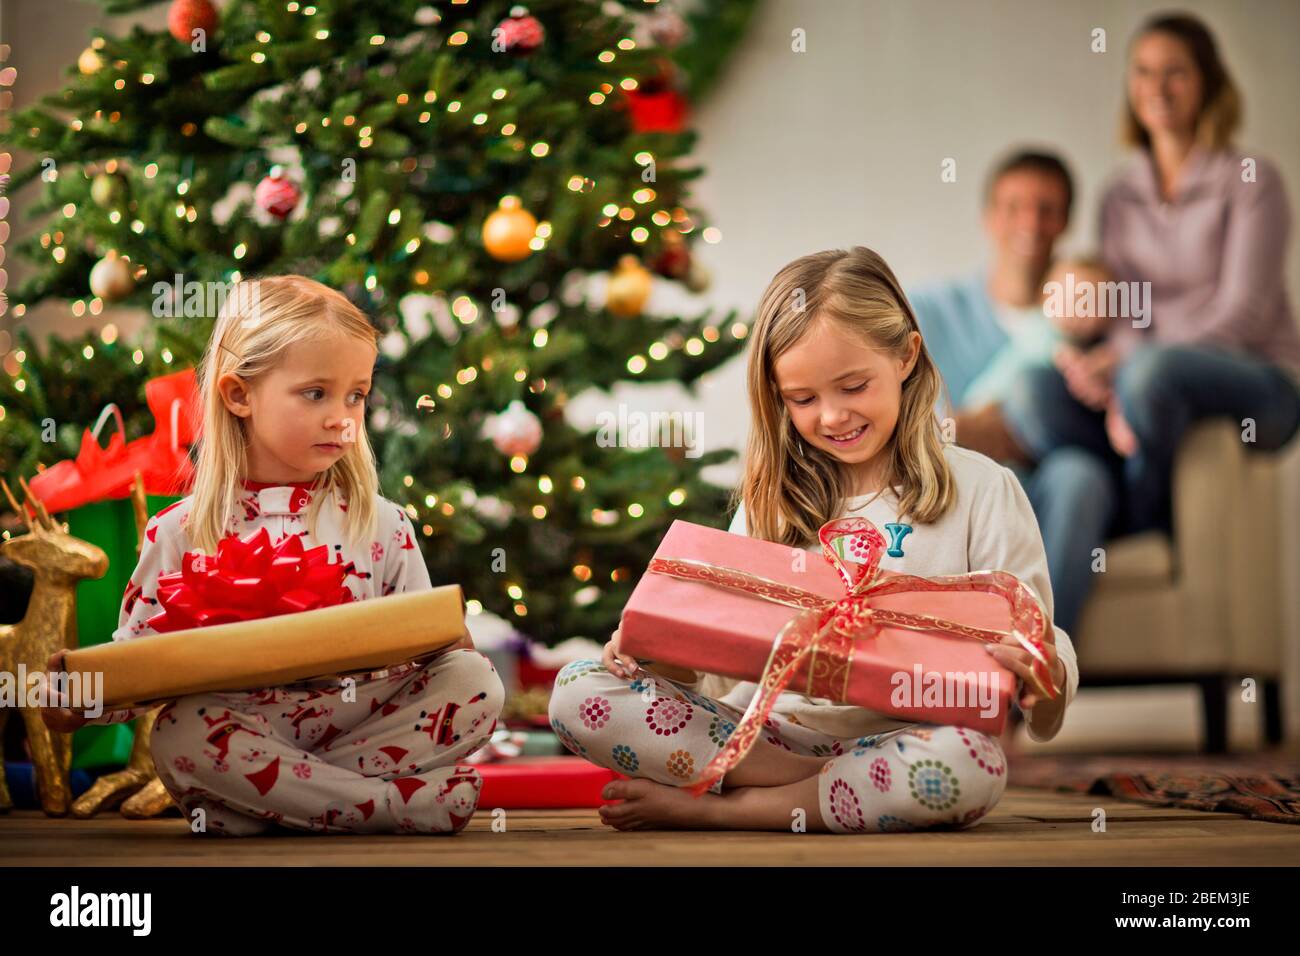 Two young girls opening their Christmas presents Stock Photo